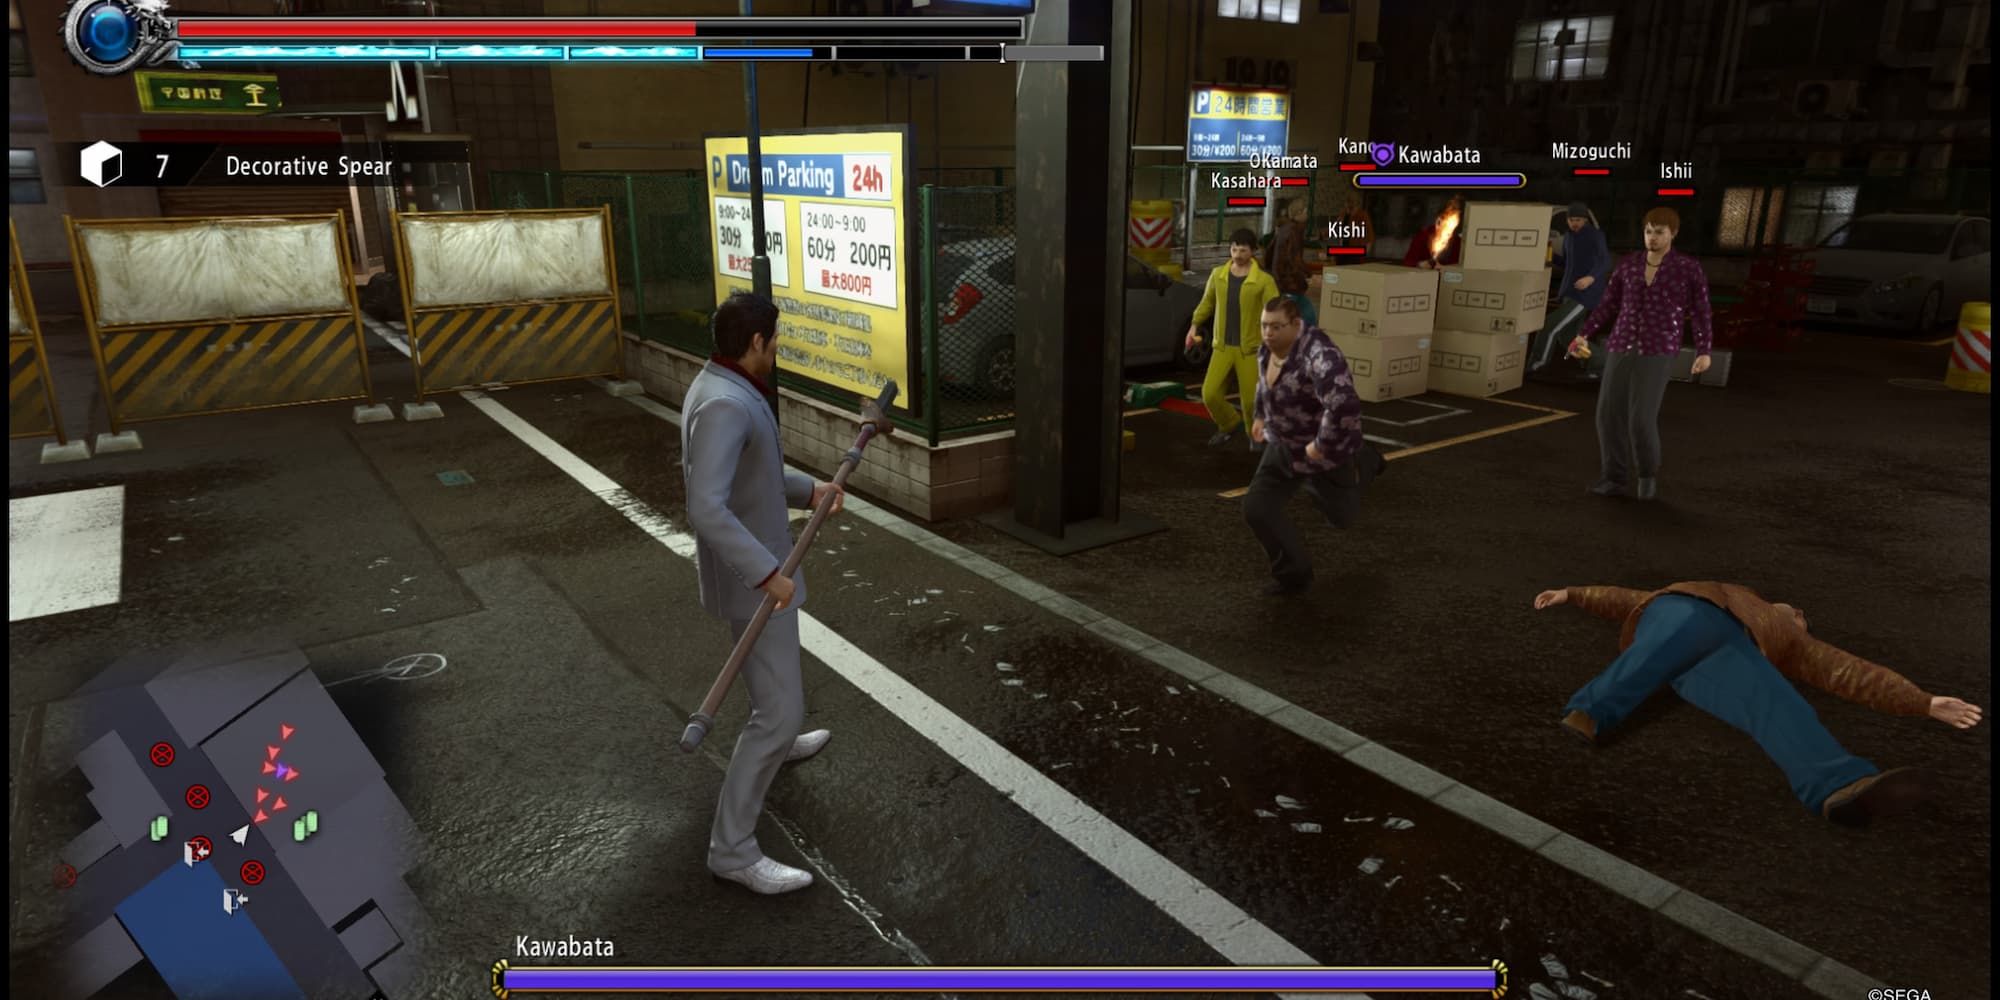 Kiryu attacking some enemies in a parking lot with a spear